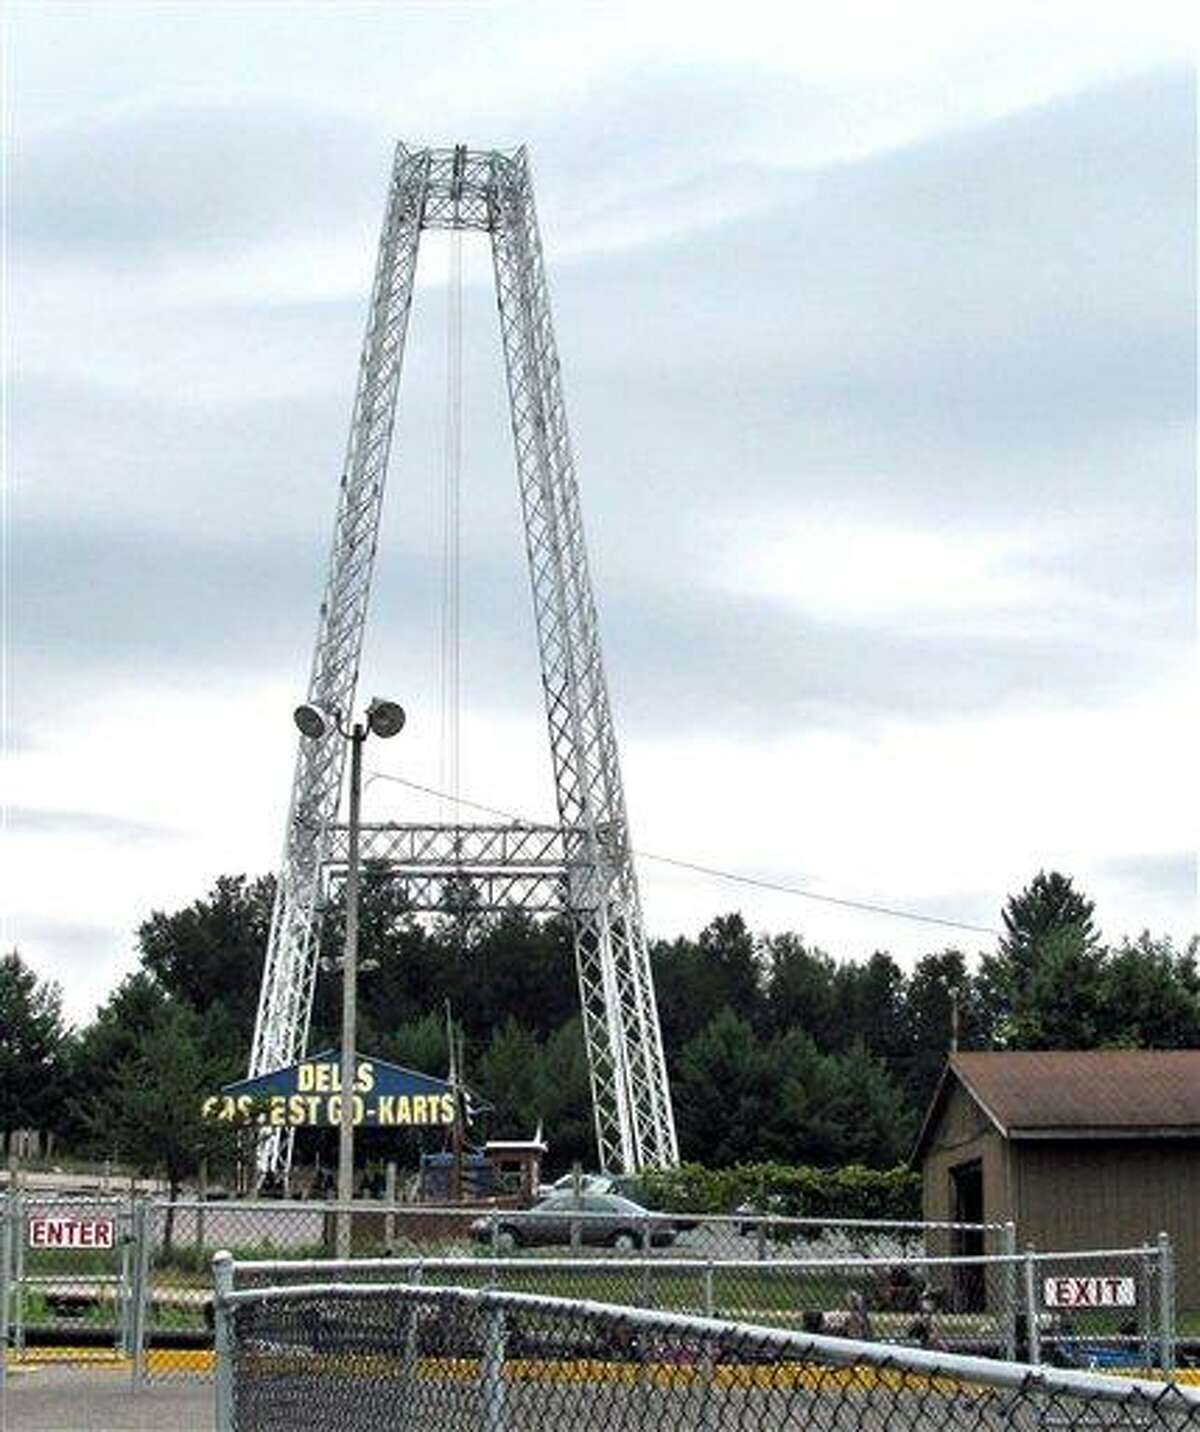 In this July 30, 2010, file photo is the Terminal Velocity free-fall ride at Extreme World in Lake Delton, Wis. An amusement park worker "blanked out" and never say an all-clear signal before he let a Florida girl plunge 100 feet to the ground. Charles A. Carnell, of Lake Delton, was charged Wednesday with one count of first-degree-reckless injury, a felony punishable by up 25 years in prison and $100,000 in fines in the July 30 incident. (AP Photo/Wisconsin State Journal, Gena Kittner, File)